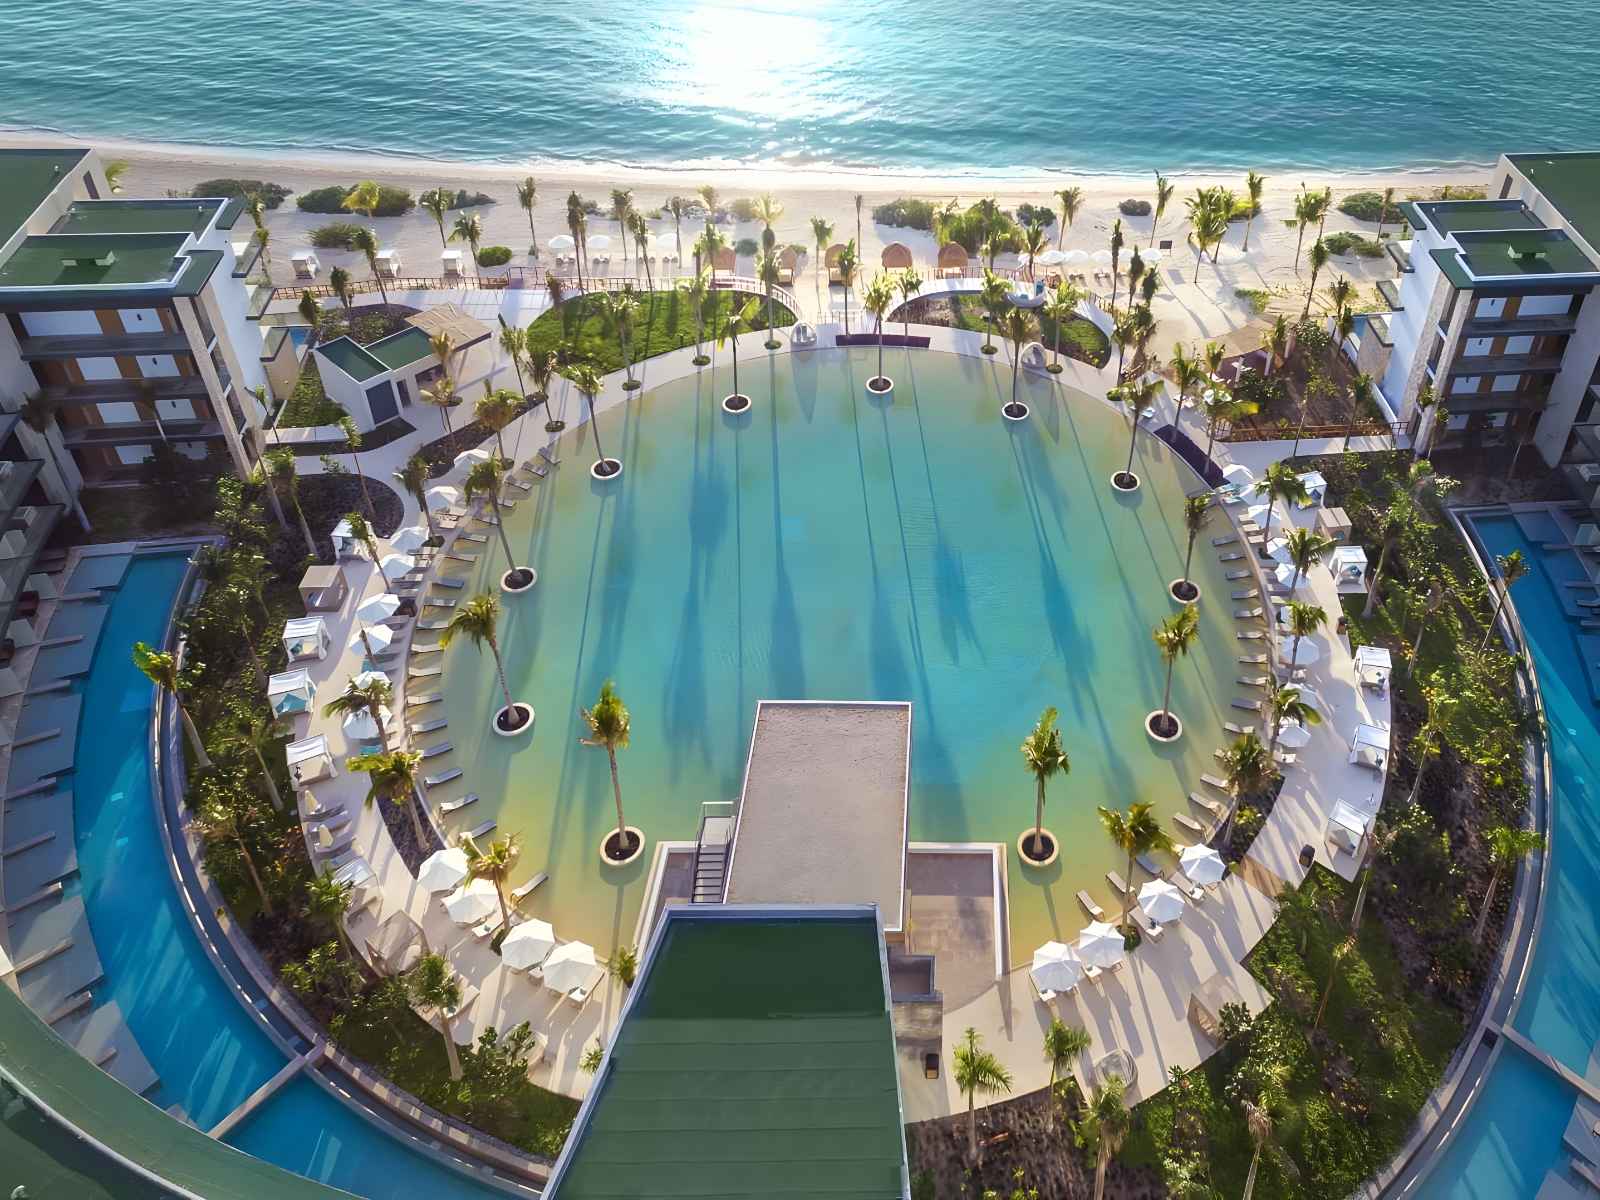 Haven Riviera Cancun, one of the best Cancun all inclusive resorts.